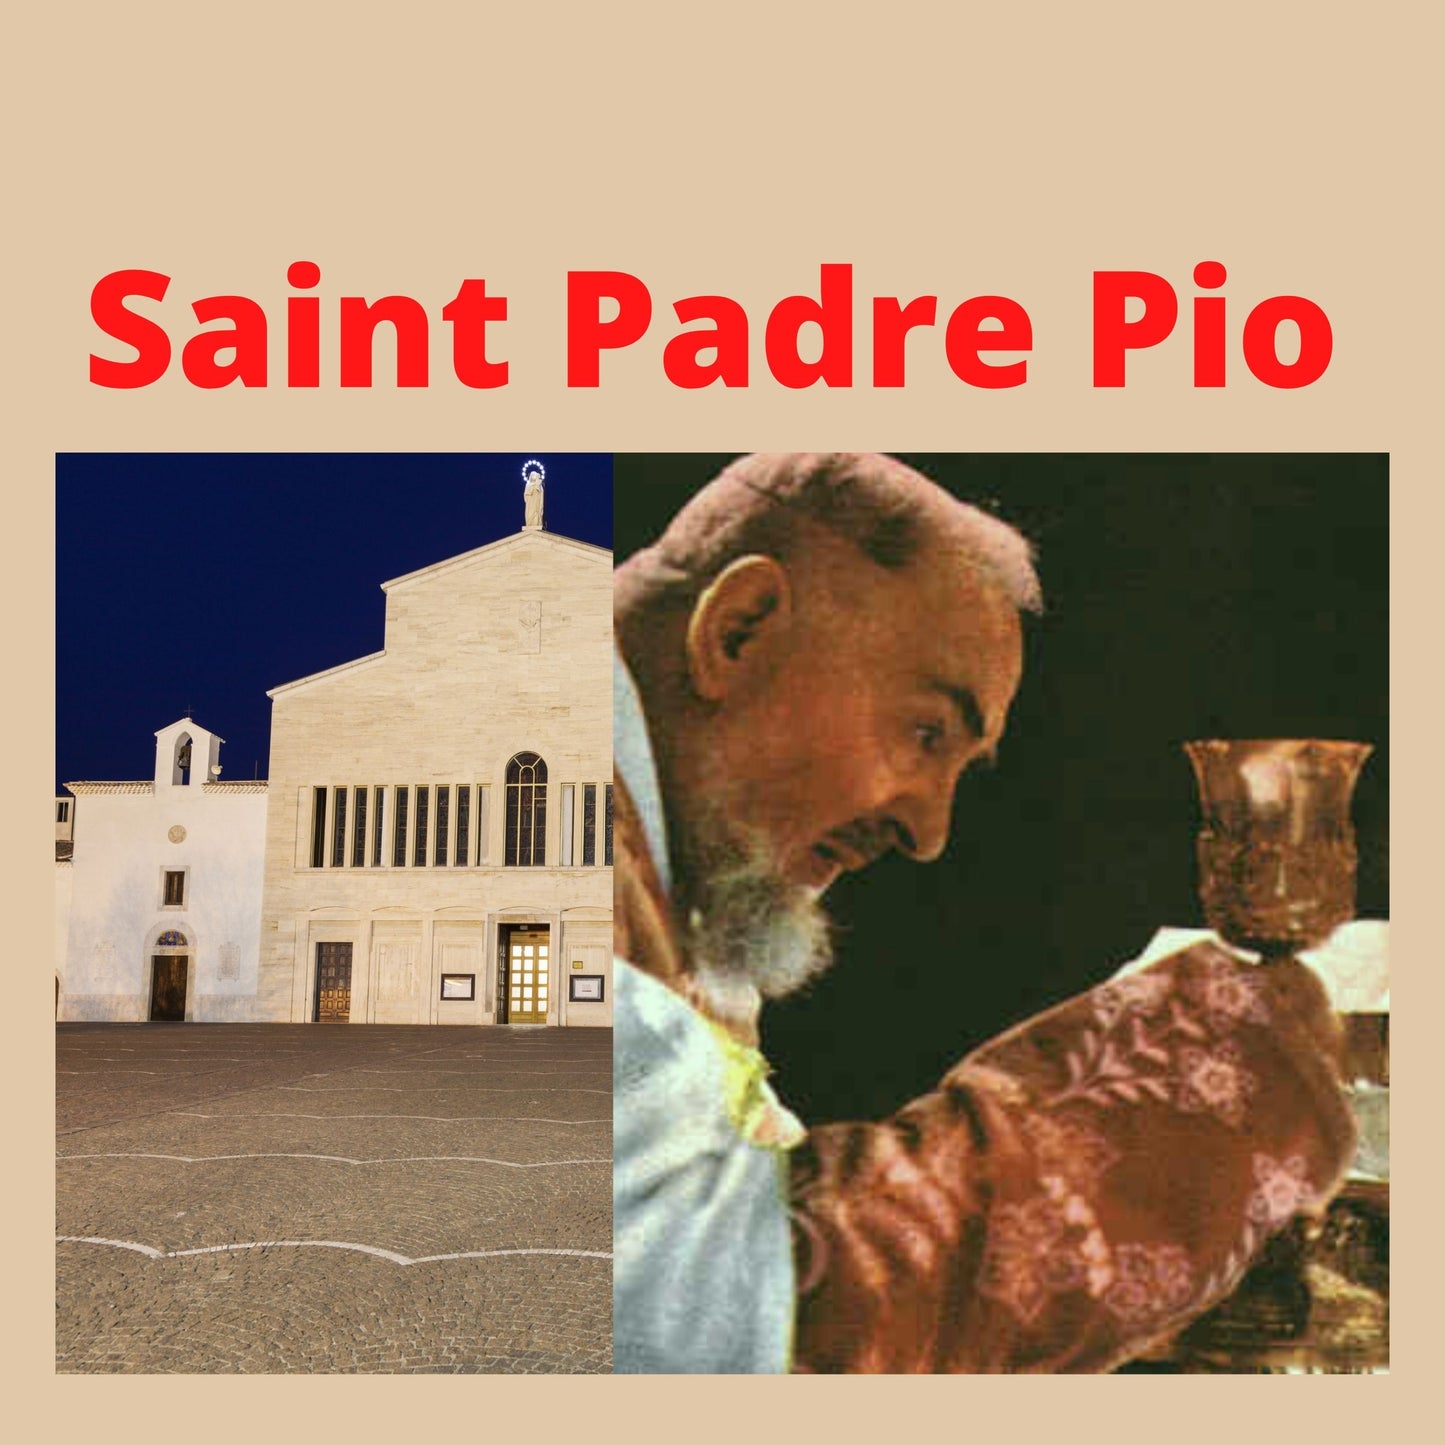 Saint Padre Pio Video Download MP4 - Bob and Penny Lord